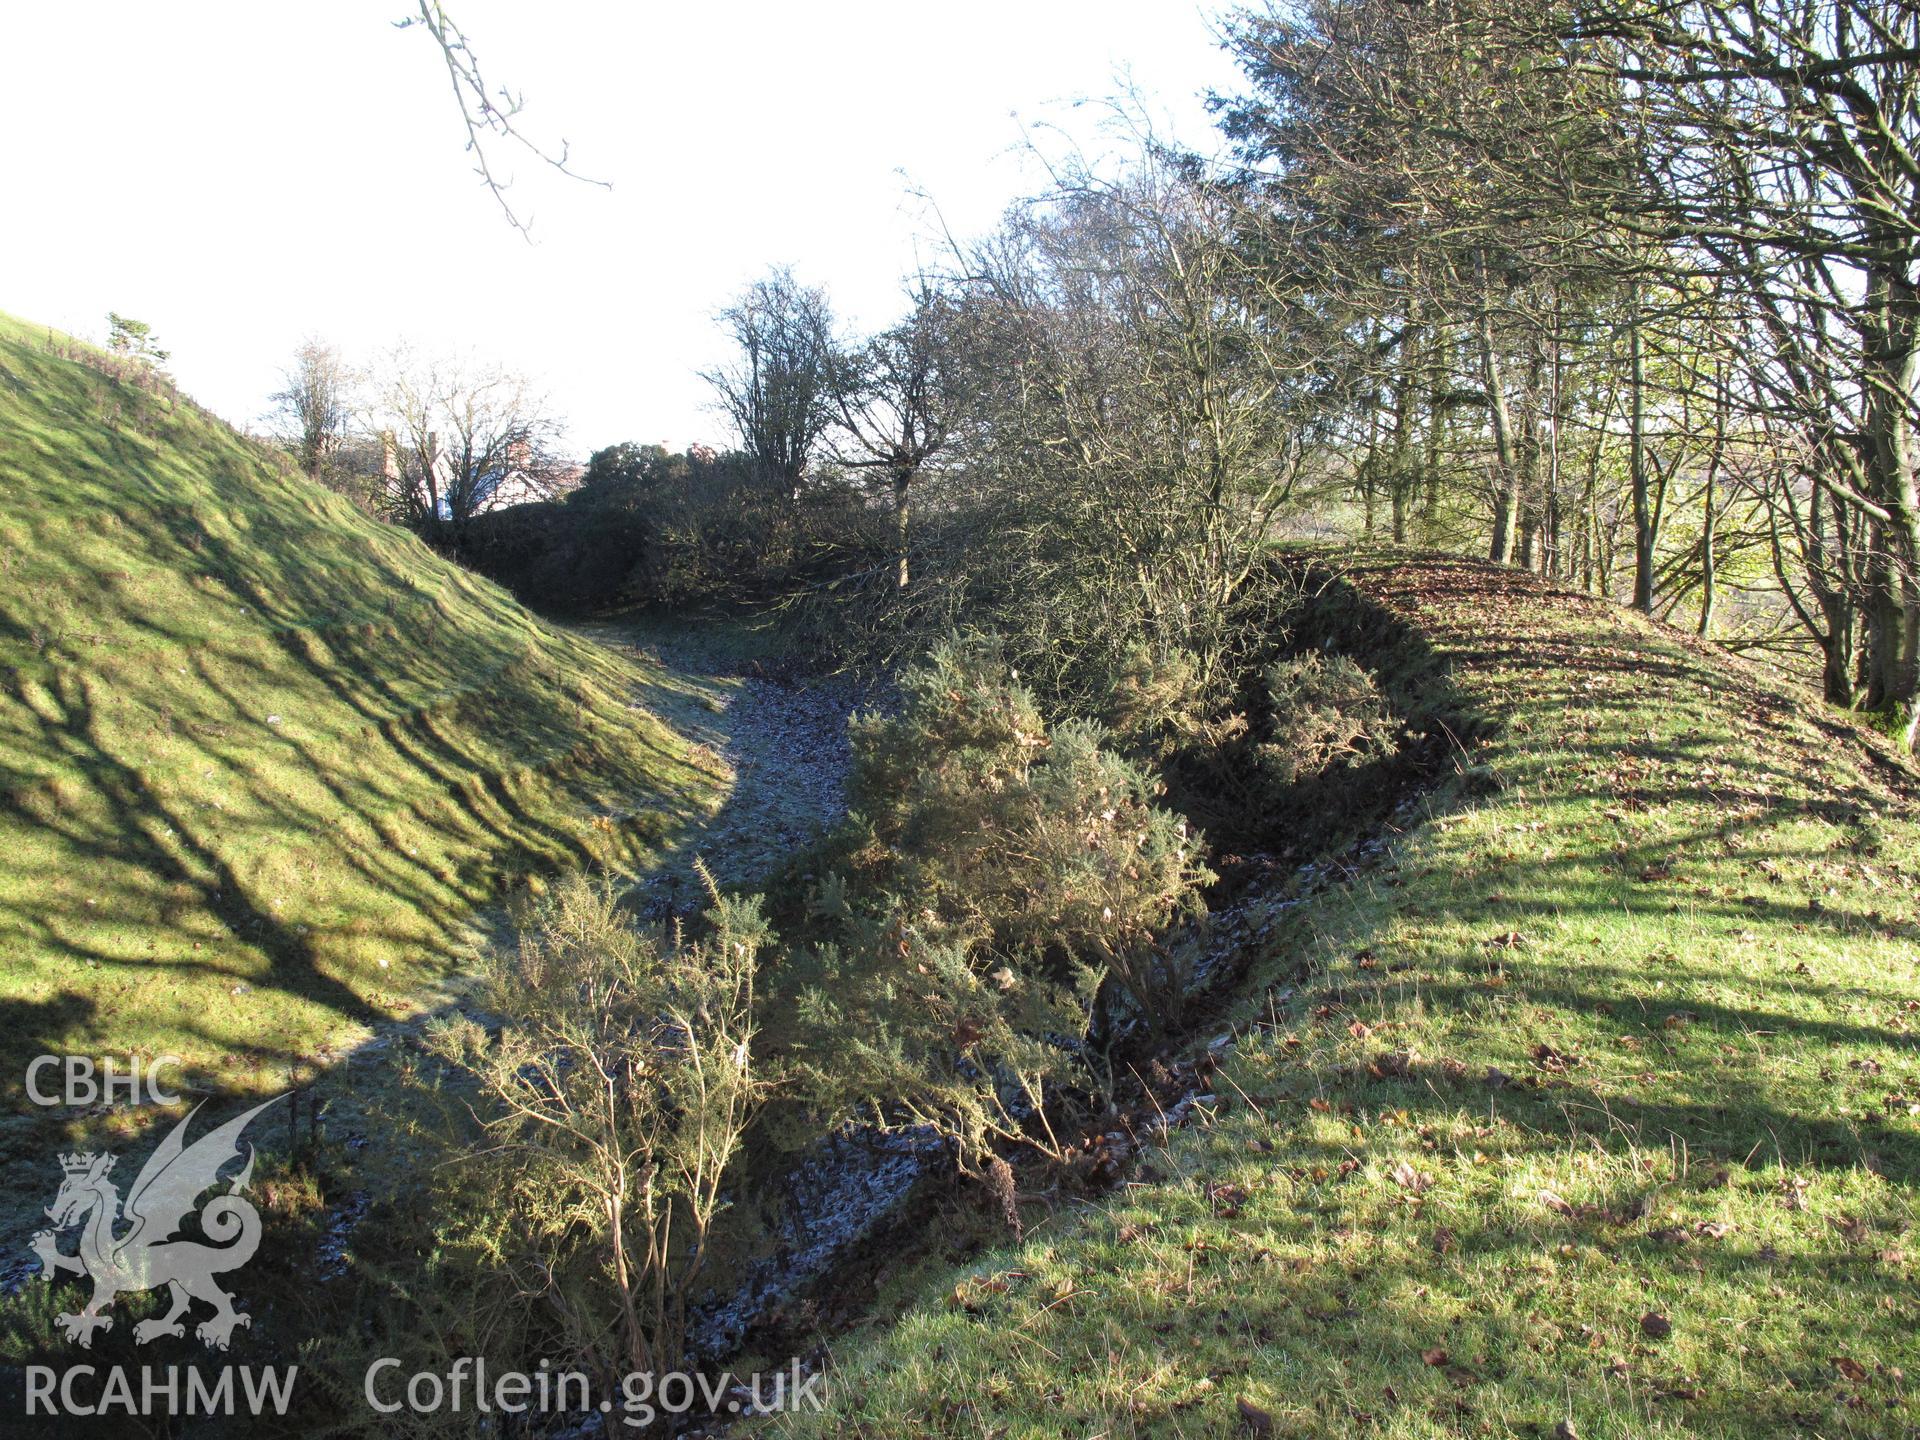 Painscastle south ditch from the west, taken by Brian Malaws on 15 November 2010.